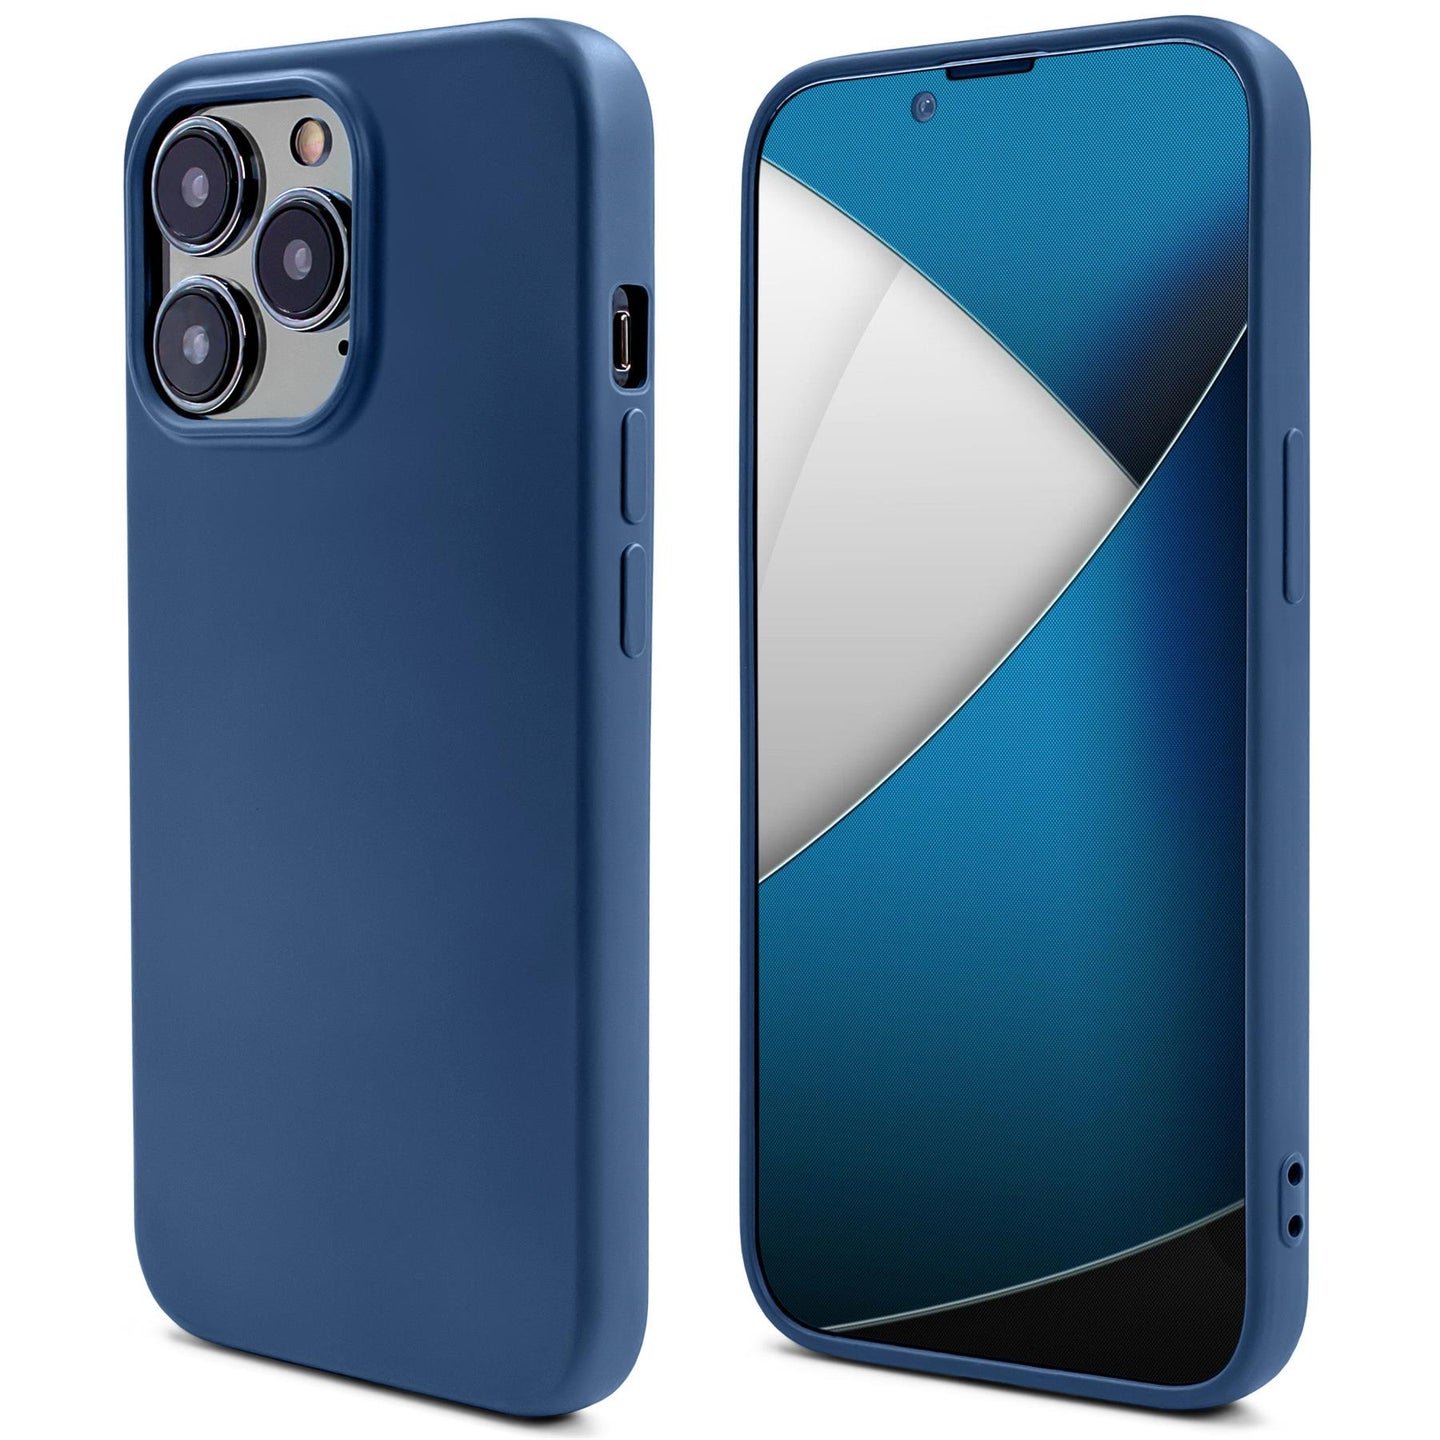 Moozy Lifestyle. Silicone Case for iPhone 14 Pro, Midnight Blue - Liquid Silicone Lightweight Cover with Matte Finish and Soft Microfiber Lining, Premium Silicone Case